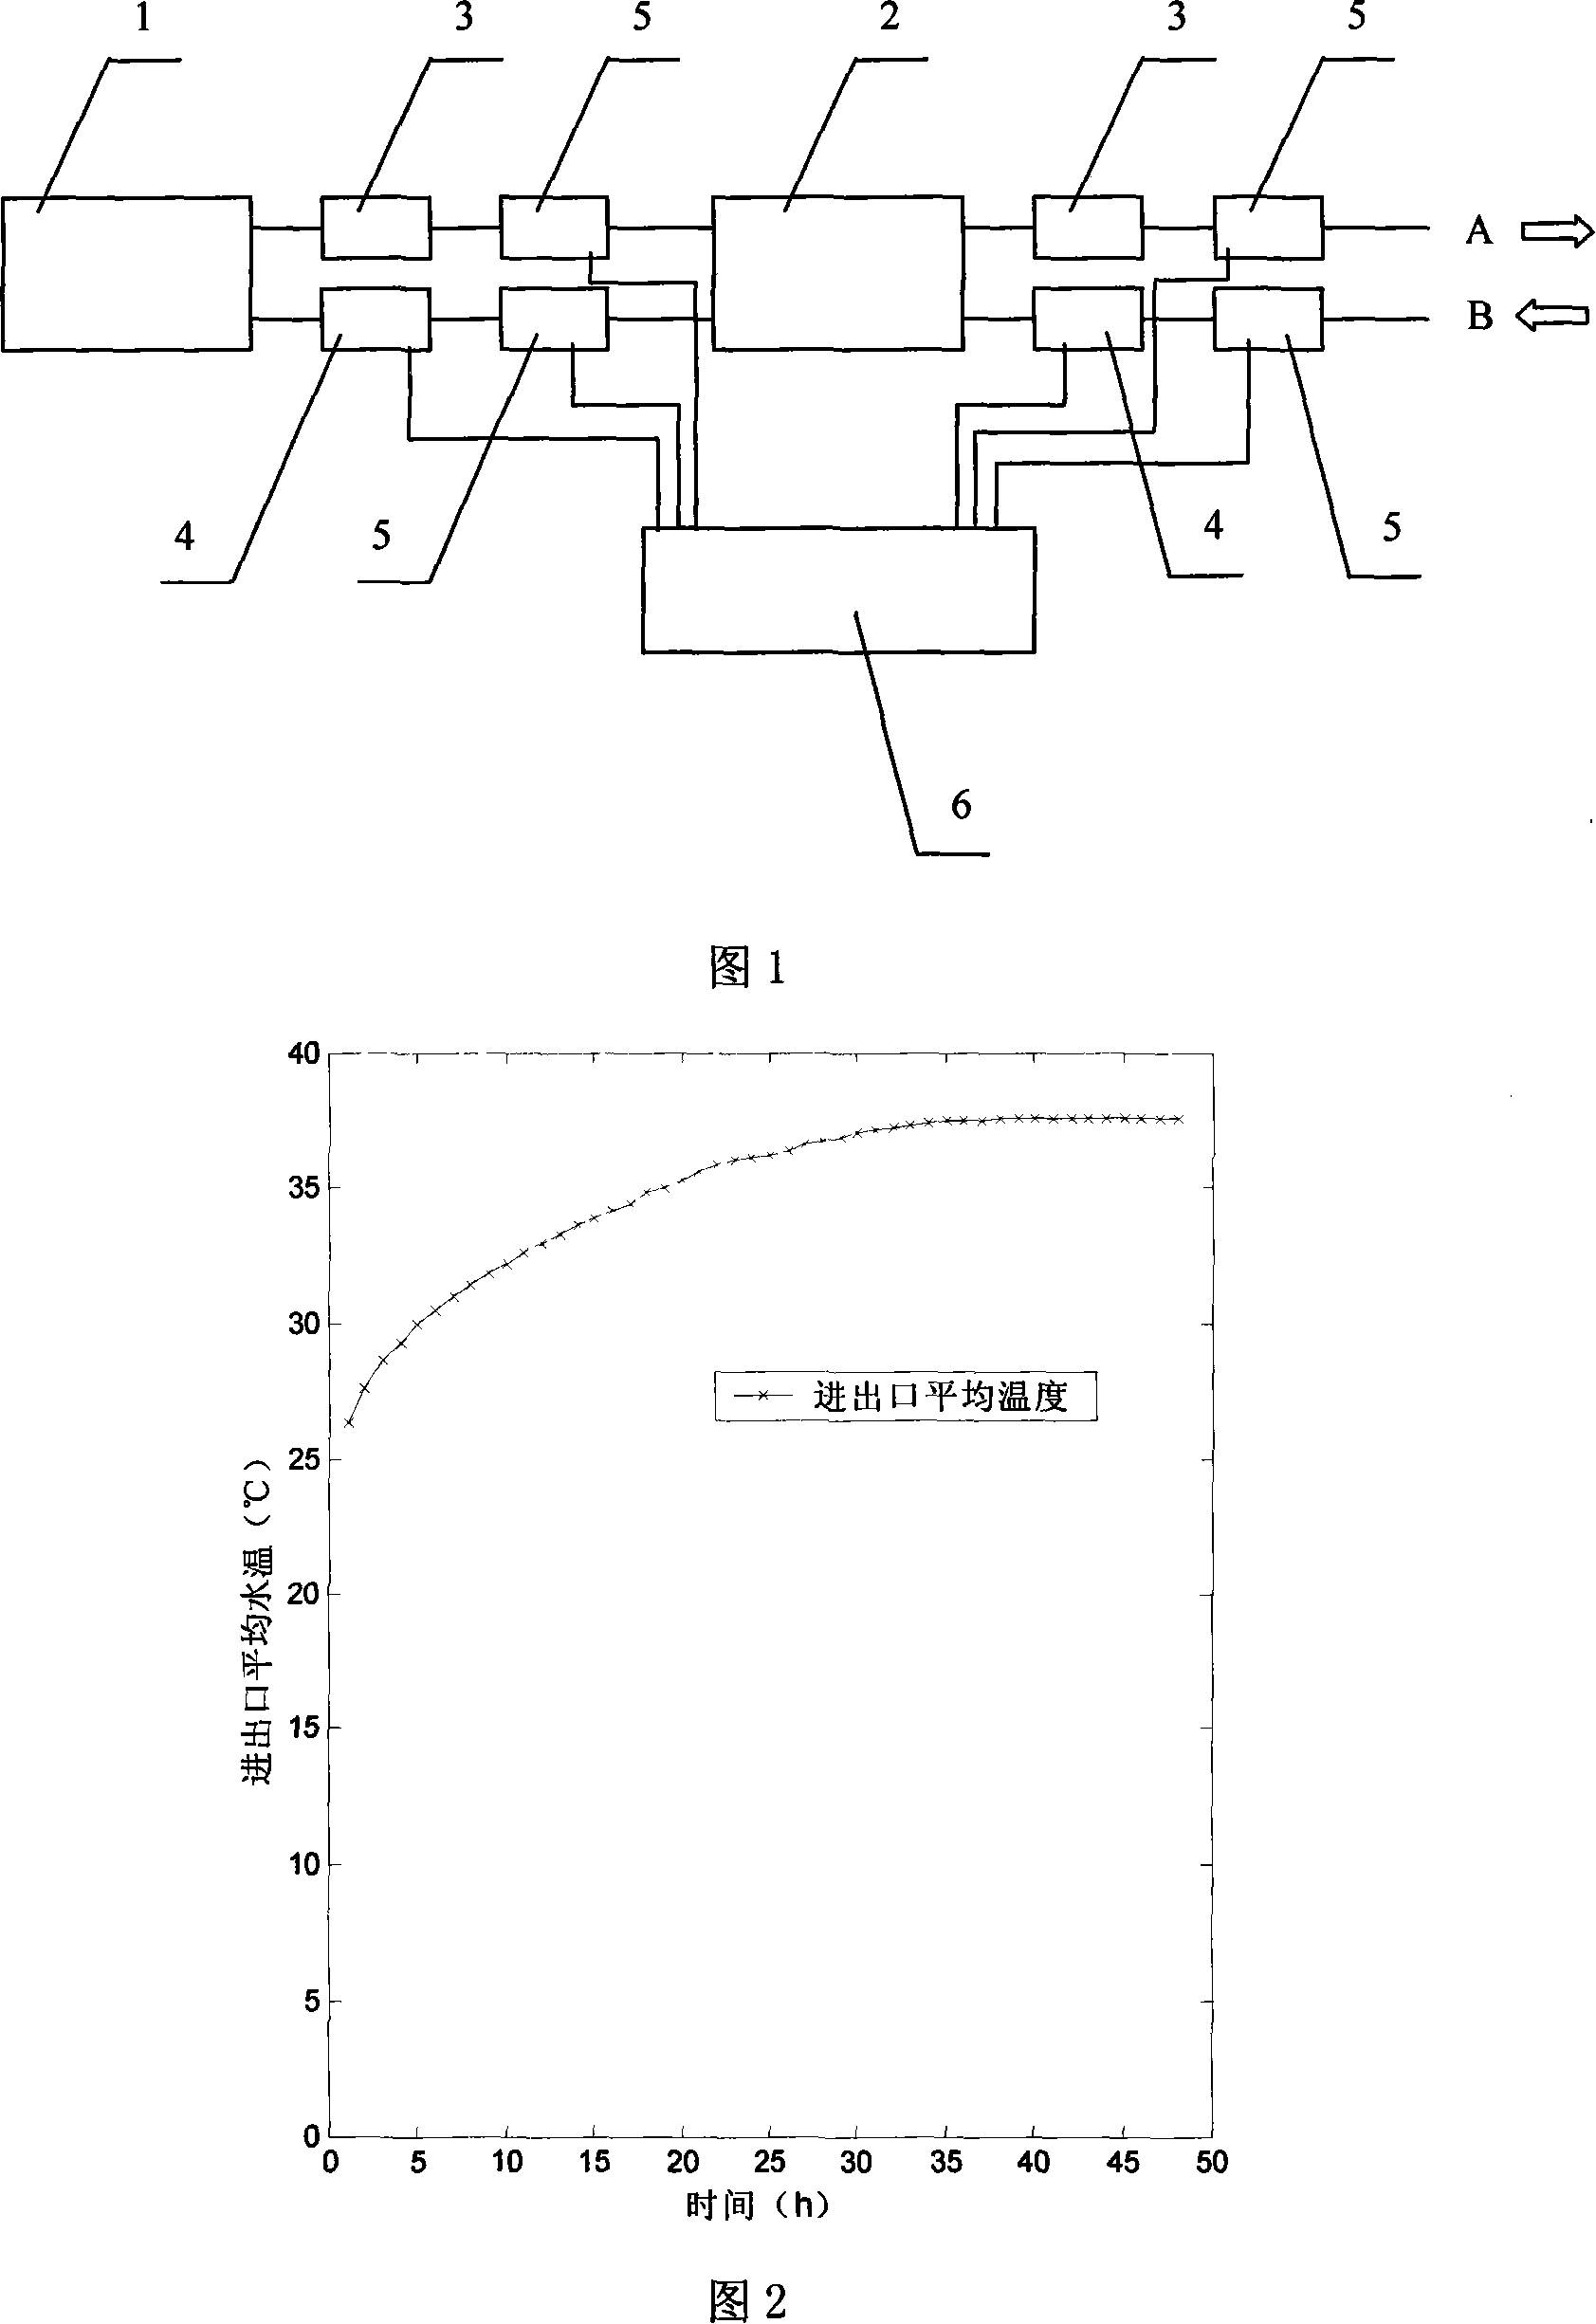 Soil thermal conductivity factor detection device and its method